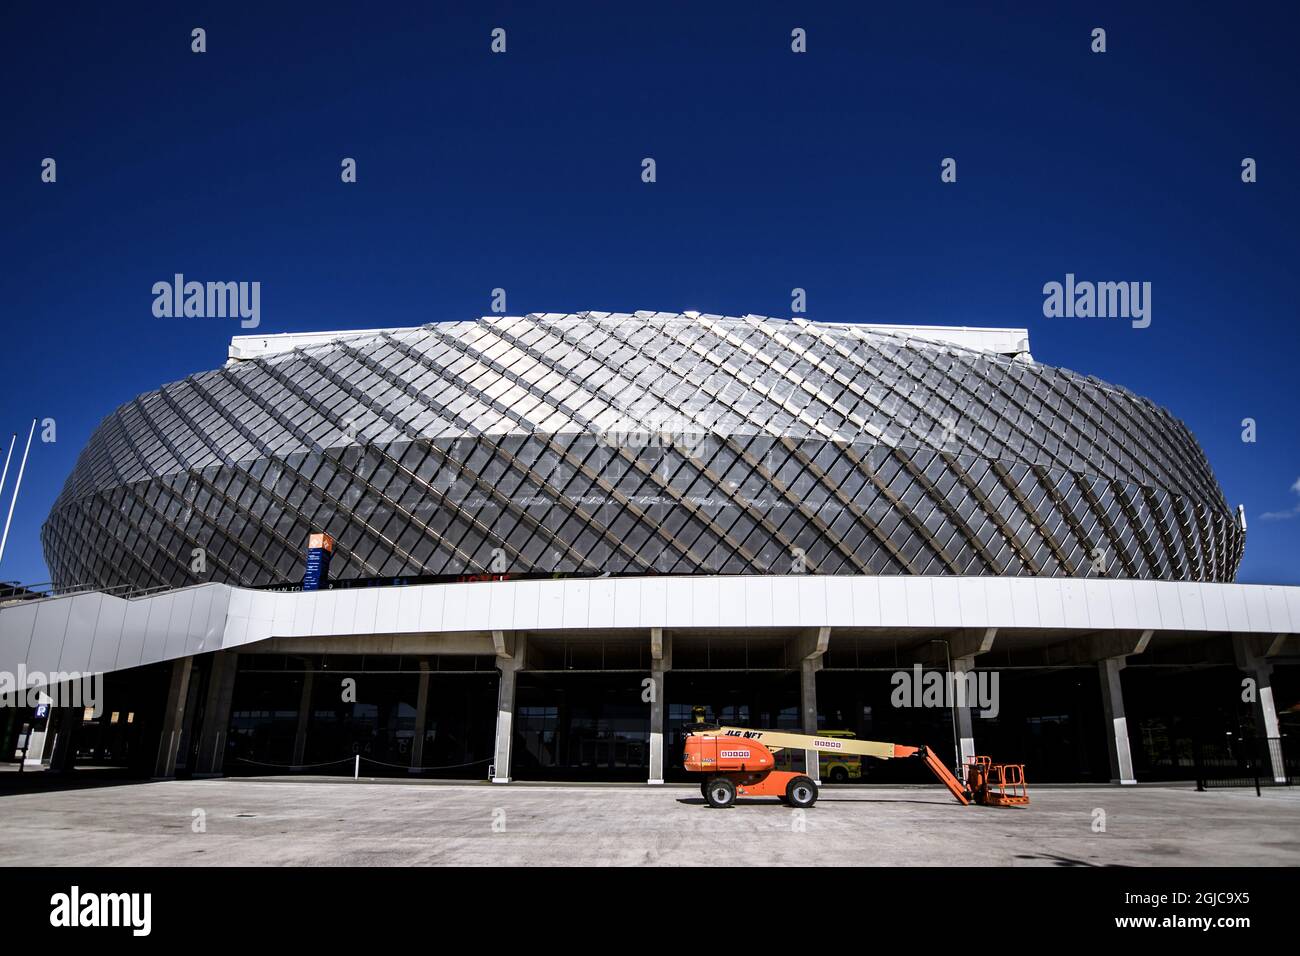 An exterior the Tele2 Arena in Stockholm, Sweden, on June 22, 2019. The International Olympic Committee (IOC) will in Lausanne, Switzerland on June 24, 2019 elect the host city for the 2026 Winter Olympics. The two remaining host cities in the election process are Stockholm-Are, Sweden, and Milan–Cortina d'Ampezzo, Italy. Photo Erik Simander / TT kod 11720 Stock Photo